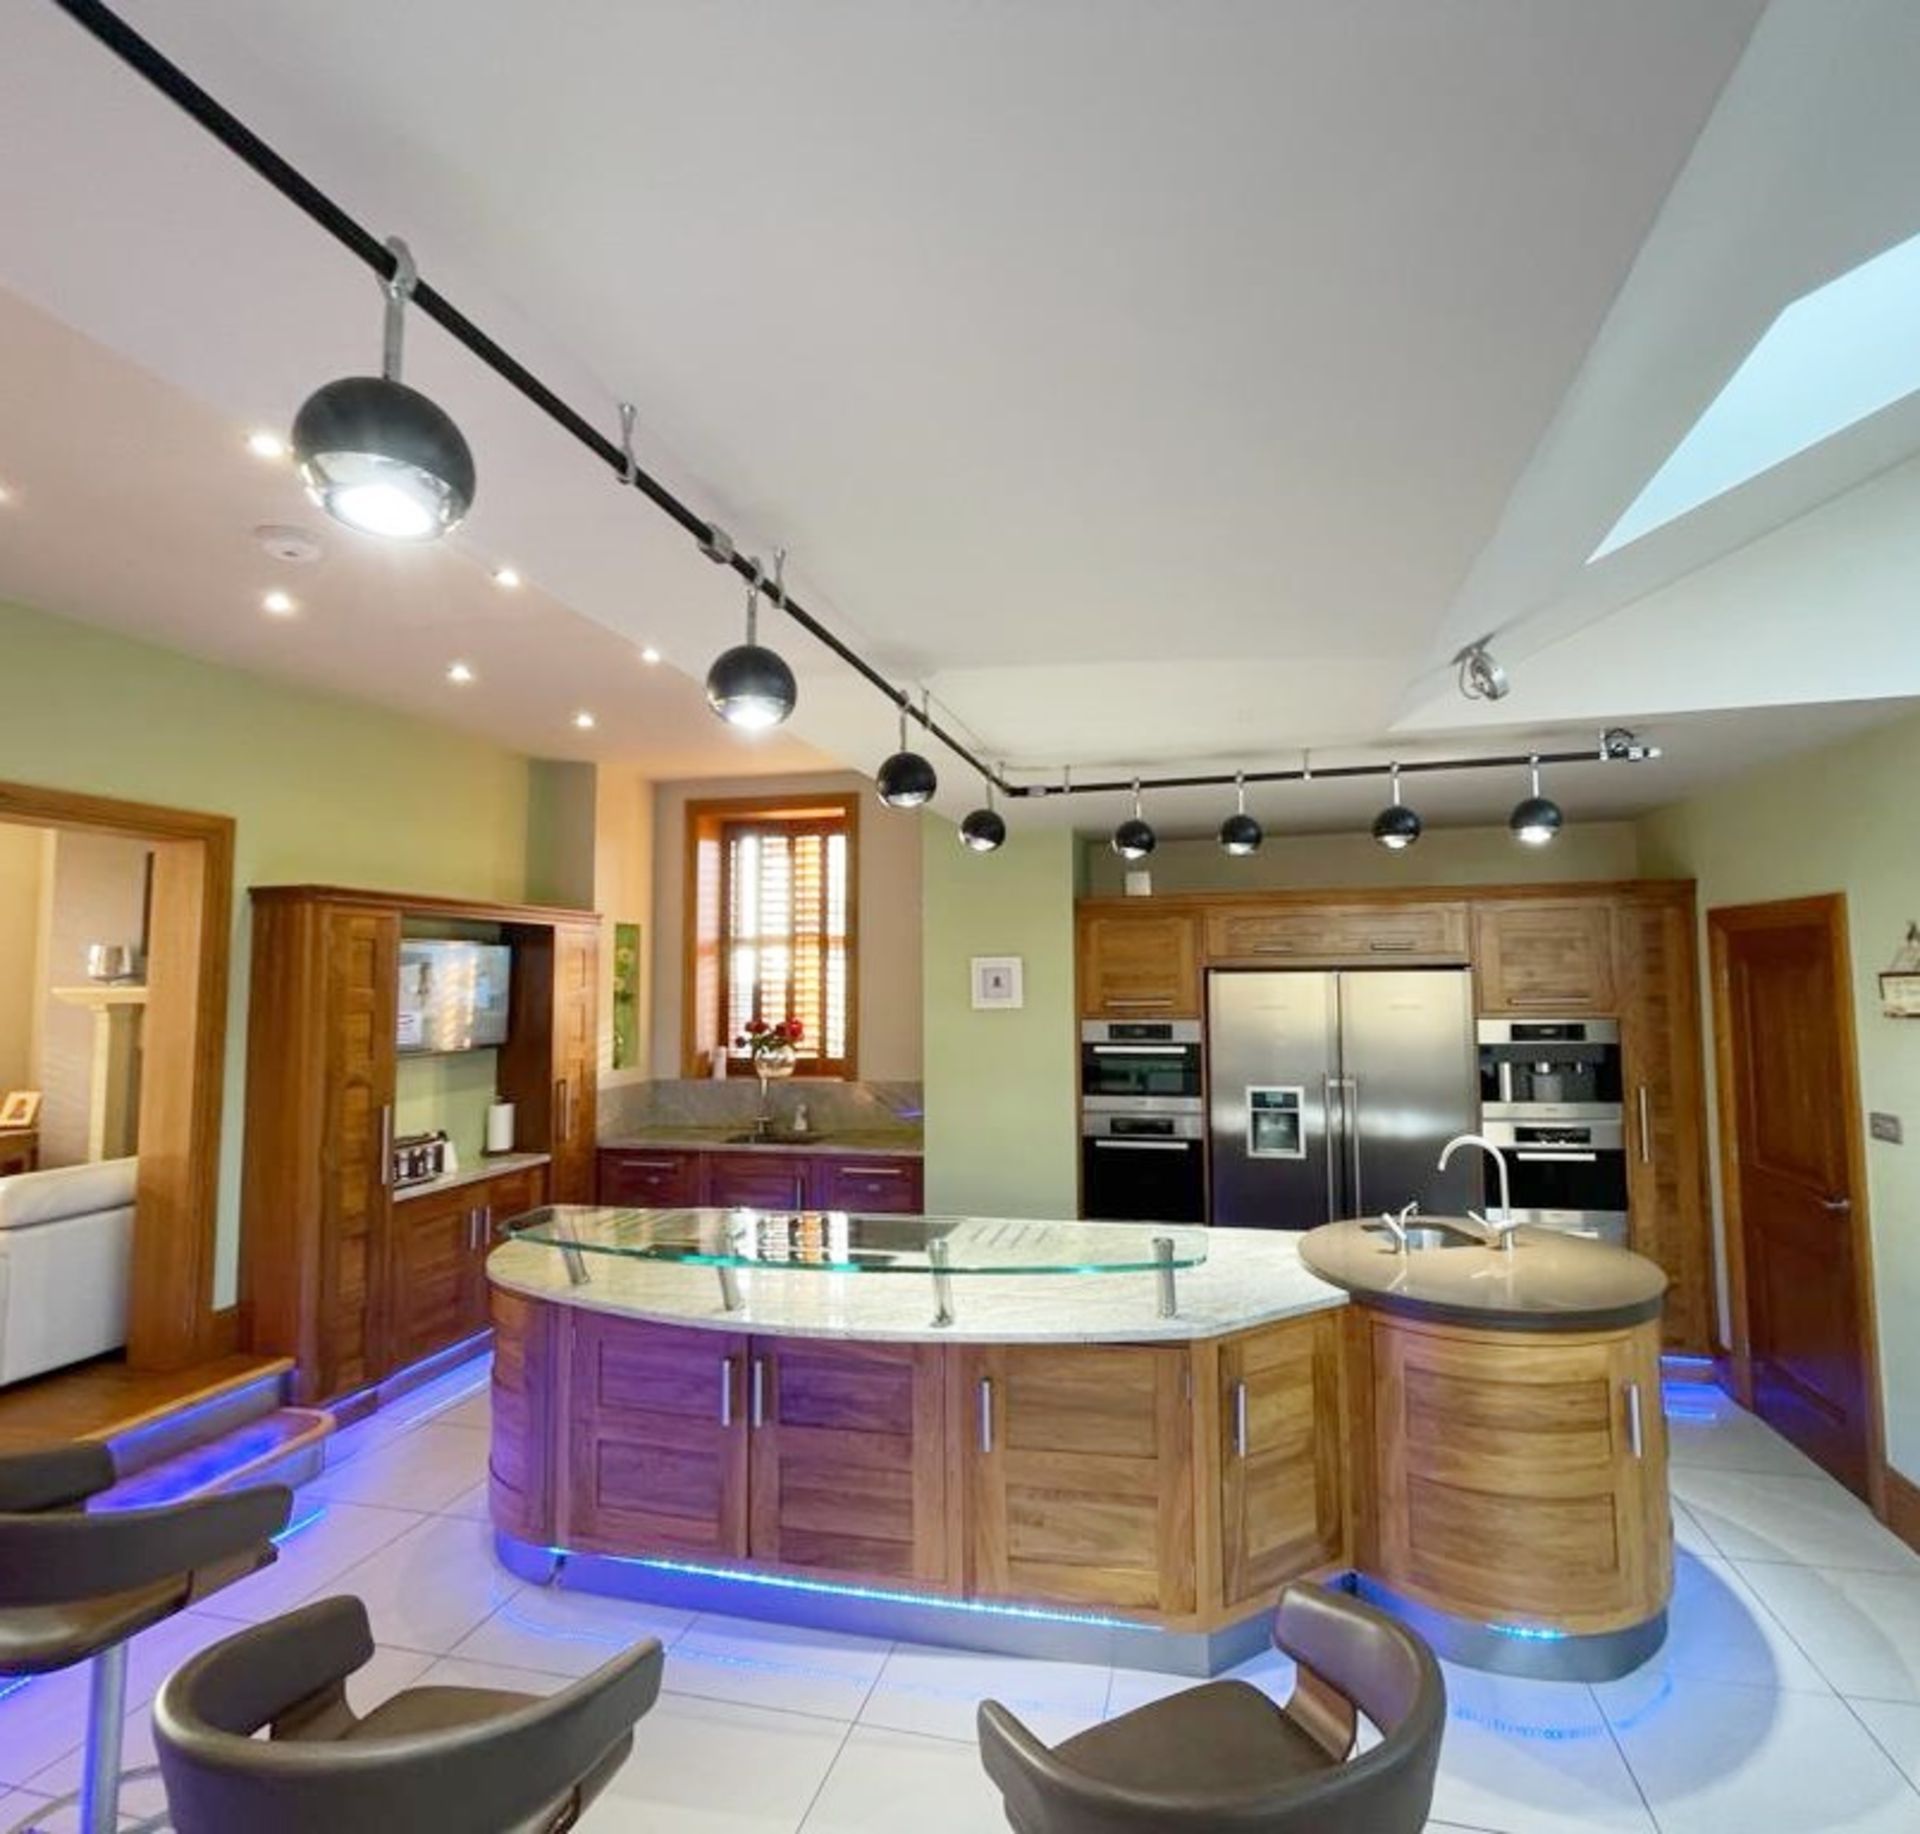 1 x Bespoke Curved Fitted Kitchen With Solid Wood Walnut Doors, Integrated Appliances, Granite Tops - Image 97 of 147